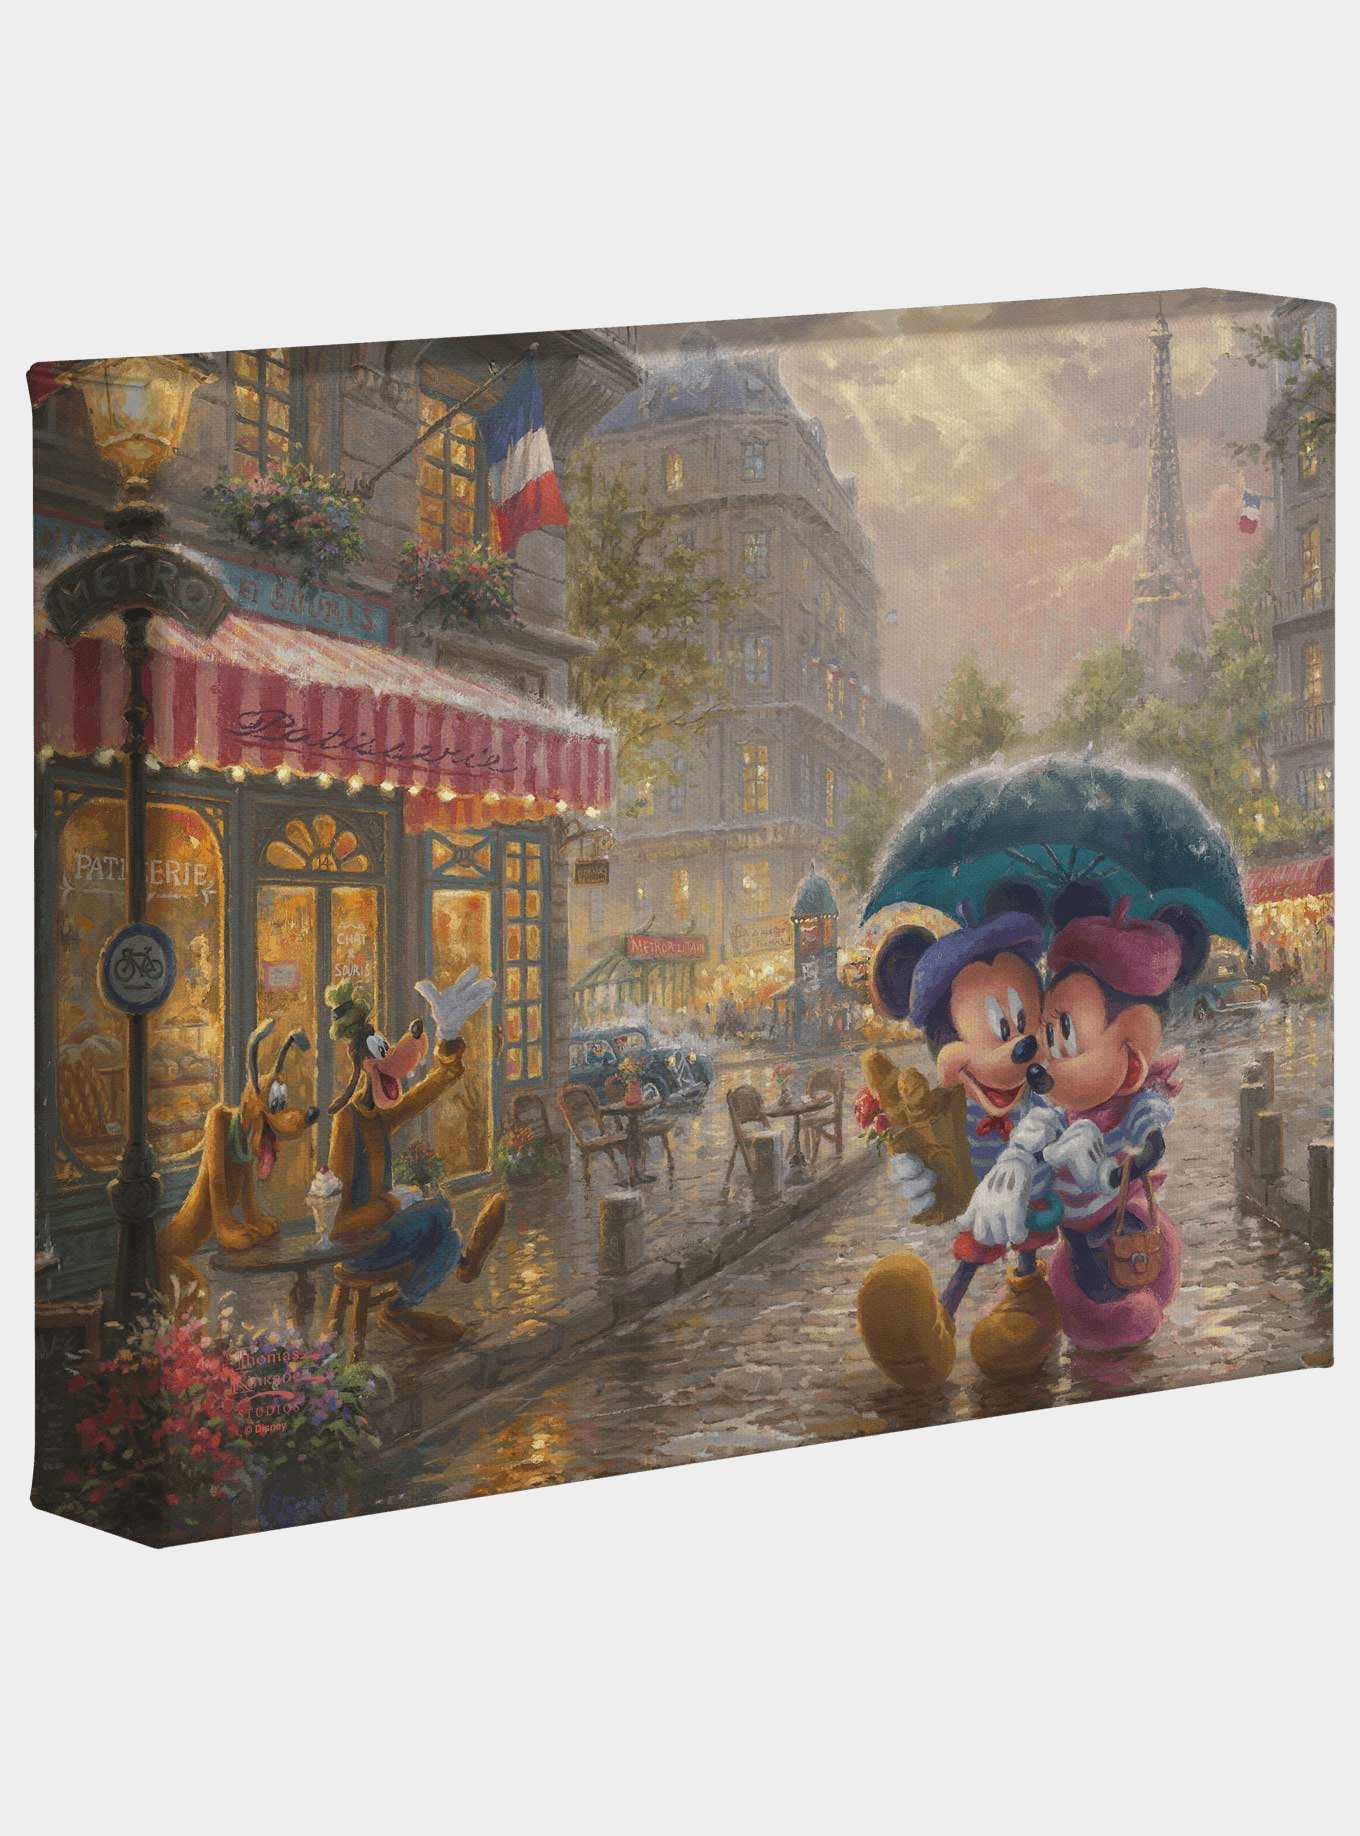 Disney Mickey And Minnie In Paris 8 X 10 Inches Gallery Wrapped Canvas, , hi-res